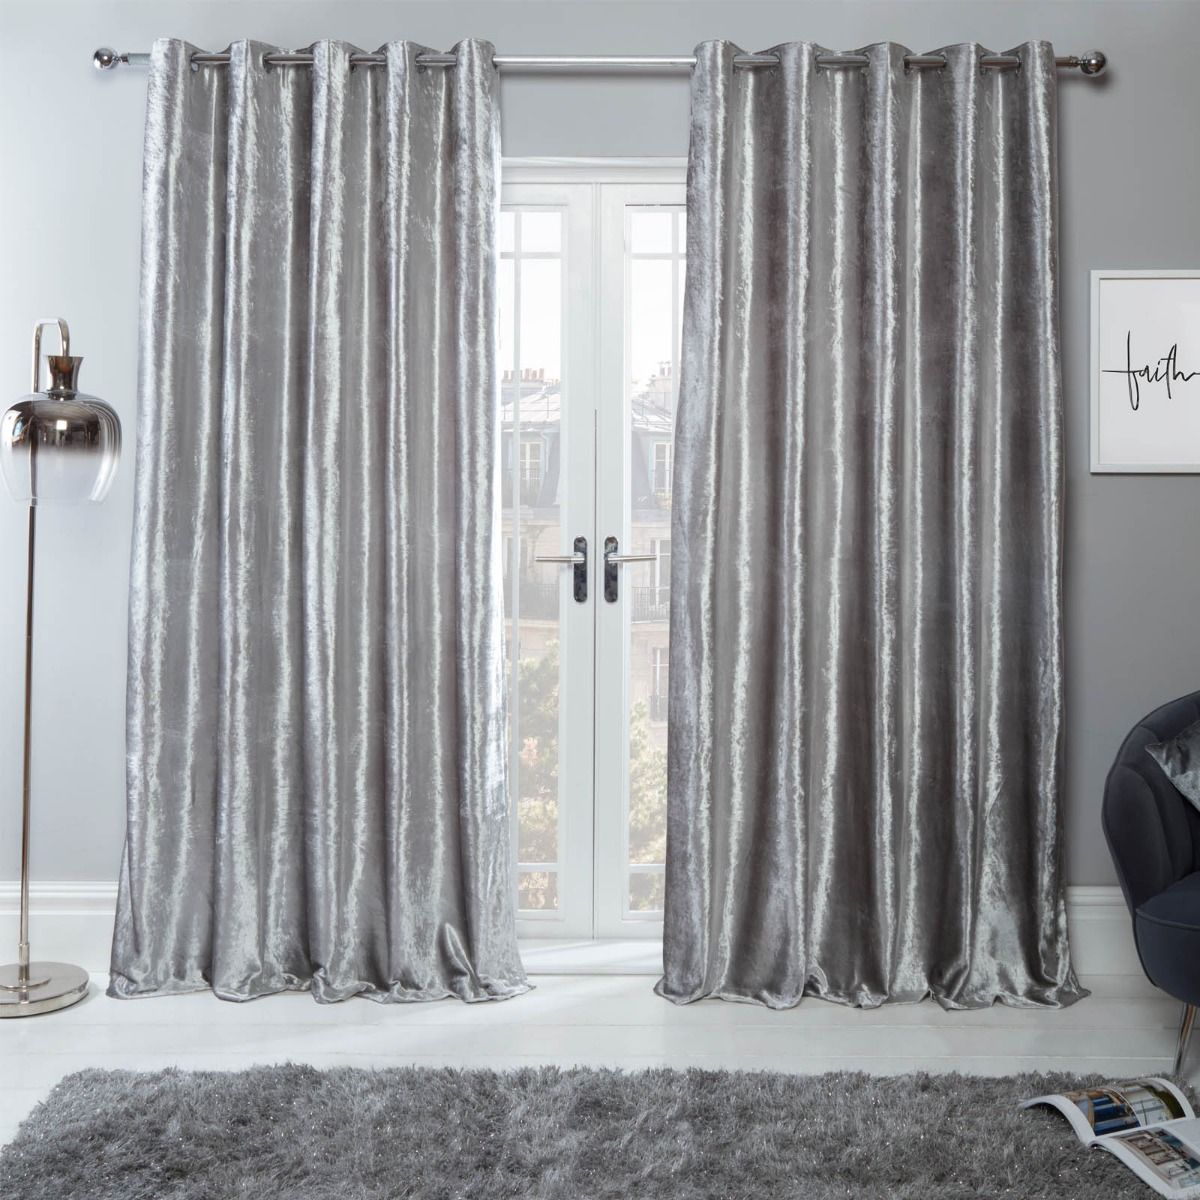 Sienna Home Crushed Velvet Eyelet Curtains - Silver 46" x 72"